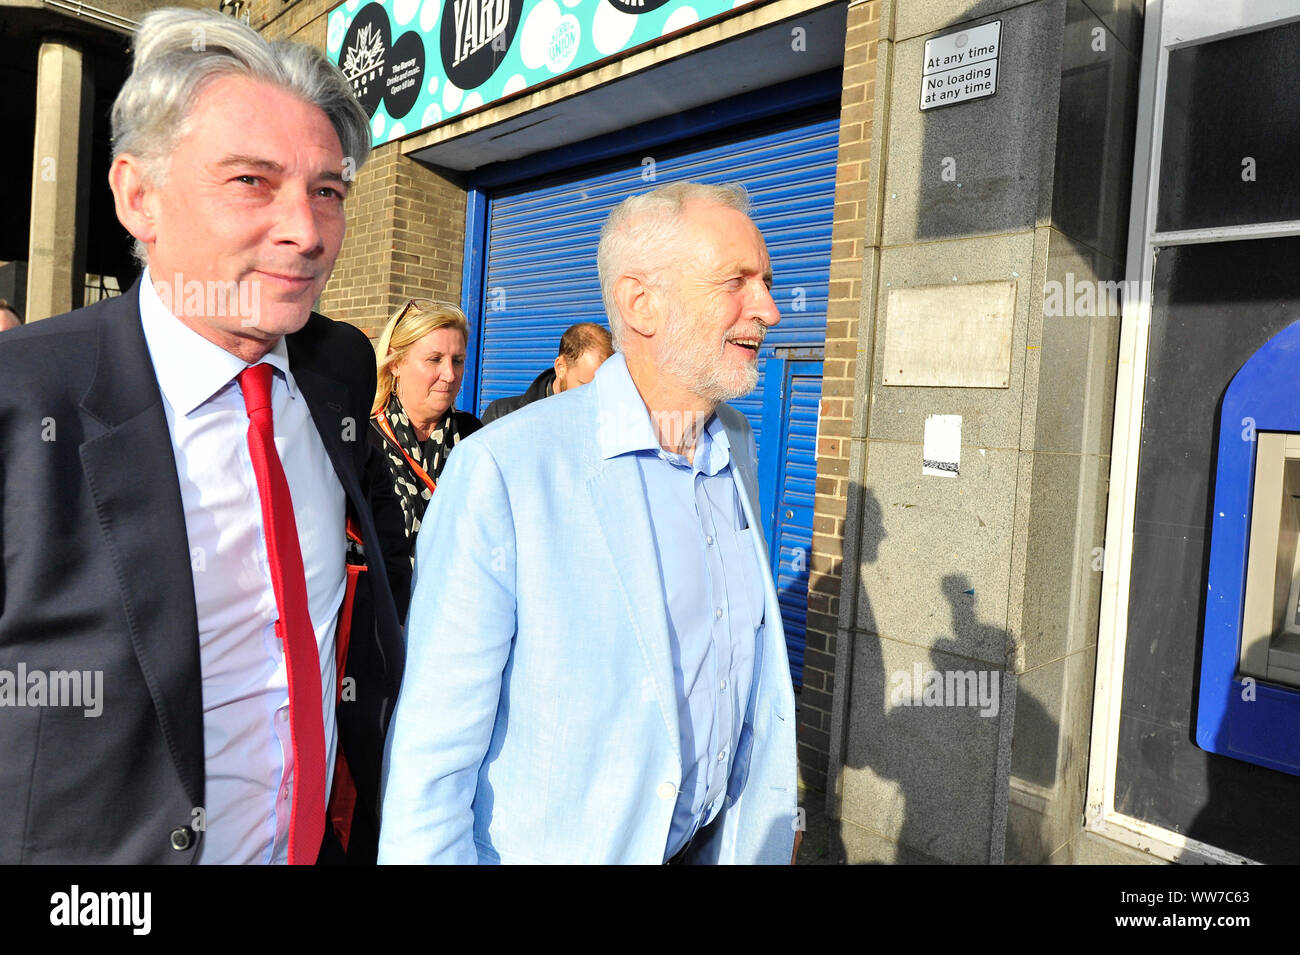 Glasgow, UK. 13 September 2019. Jeremy Corbyn MP - Leader of the Scottish Labour Party along with Richard Leanard MSP - Leader of the Scottish Labour Party going into Strath Union which is the student union of Strathclyde University in Glasgow.  They are there to give a talk and answer questions from the universitys students. Colin Fisher/CDFIMAGES.COM Credit: Colin Fisher/Alamy Live News Stock Photo